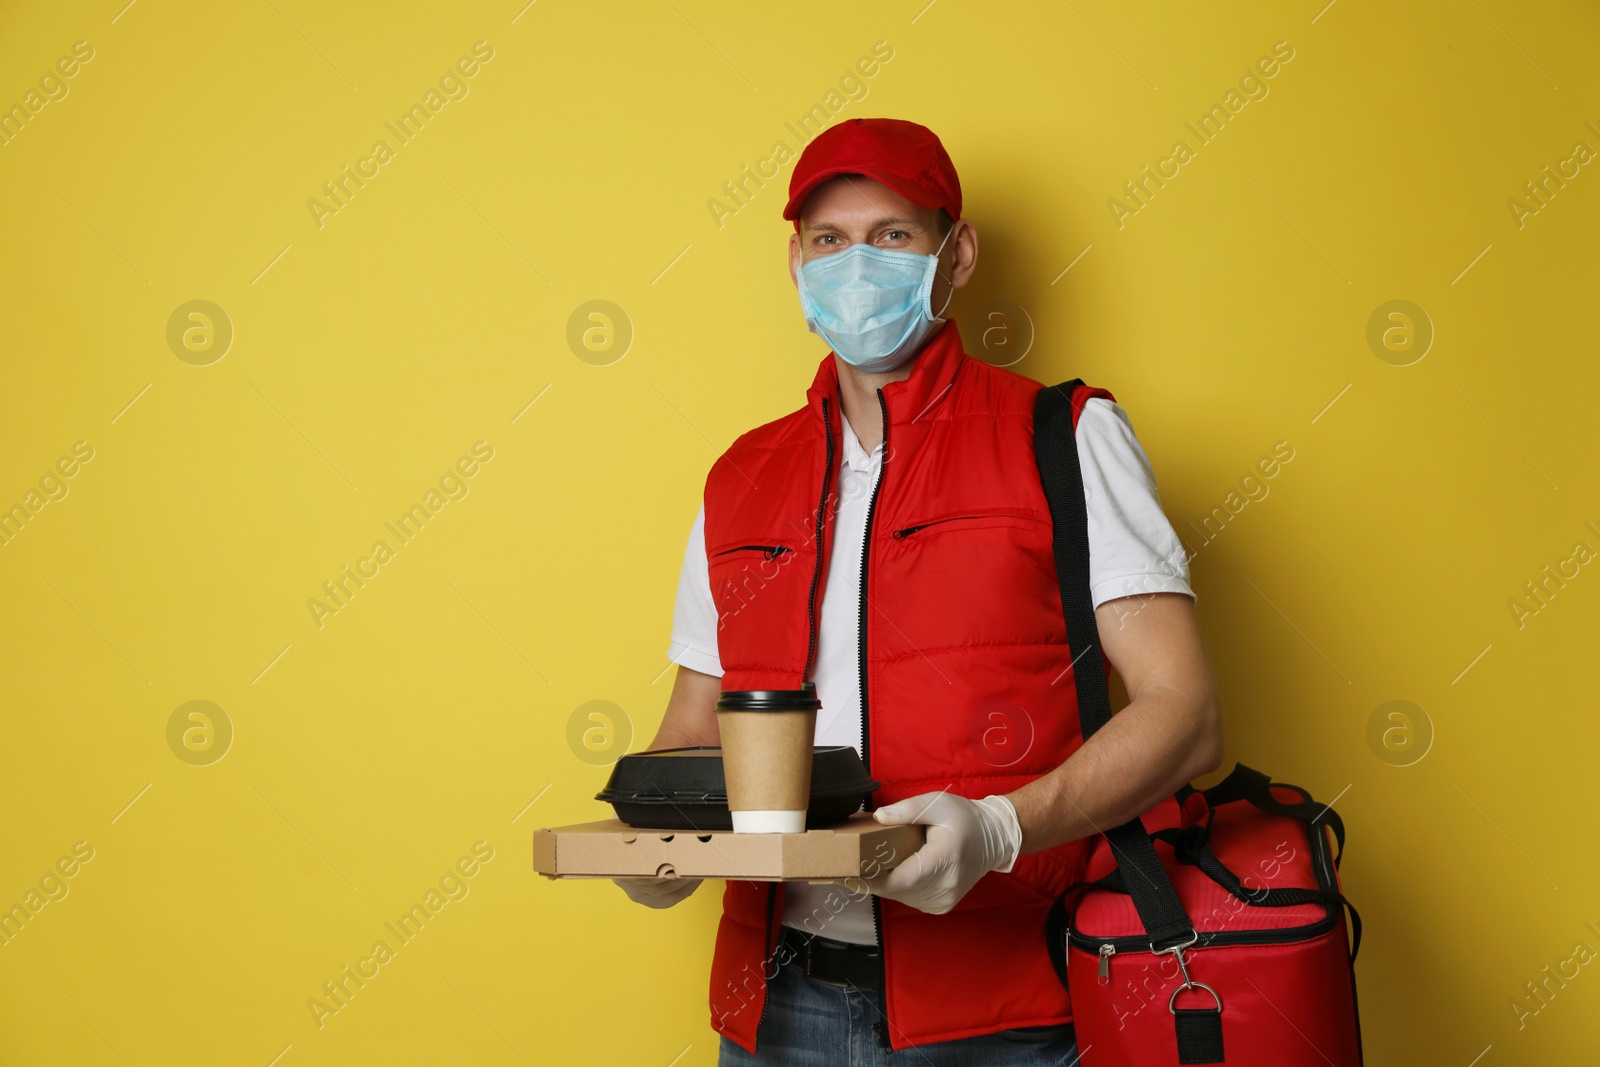 Photo of Courier in protective gloves and mask holding order on yellow background. Food delivery service during coronavirus quarantine